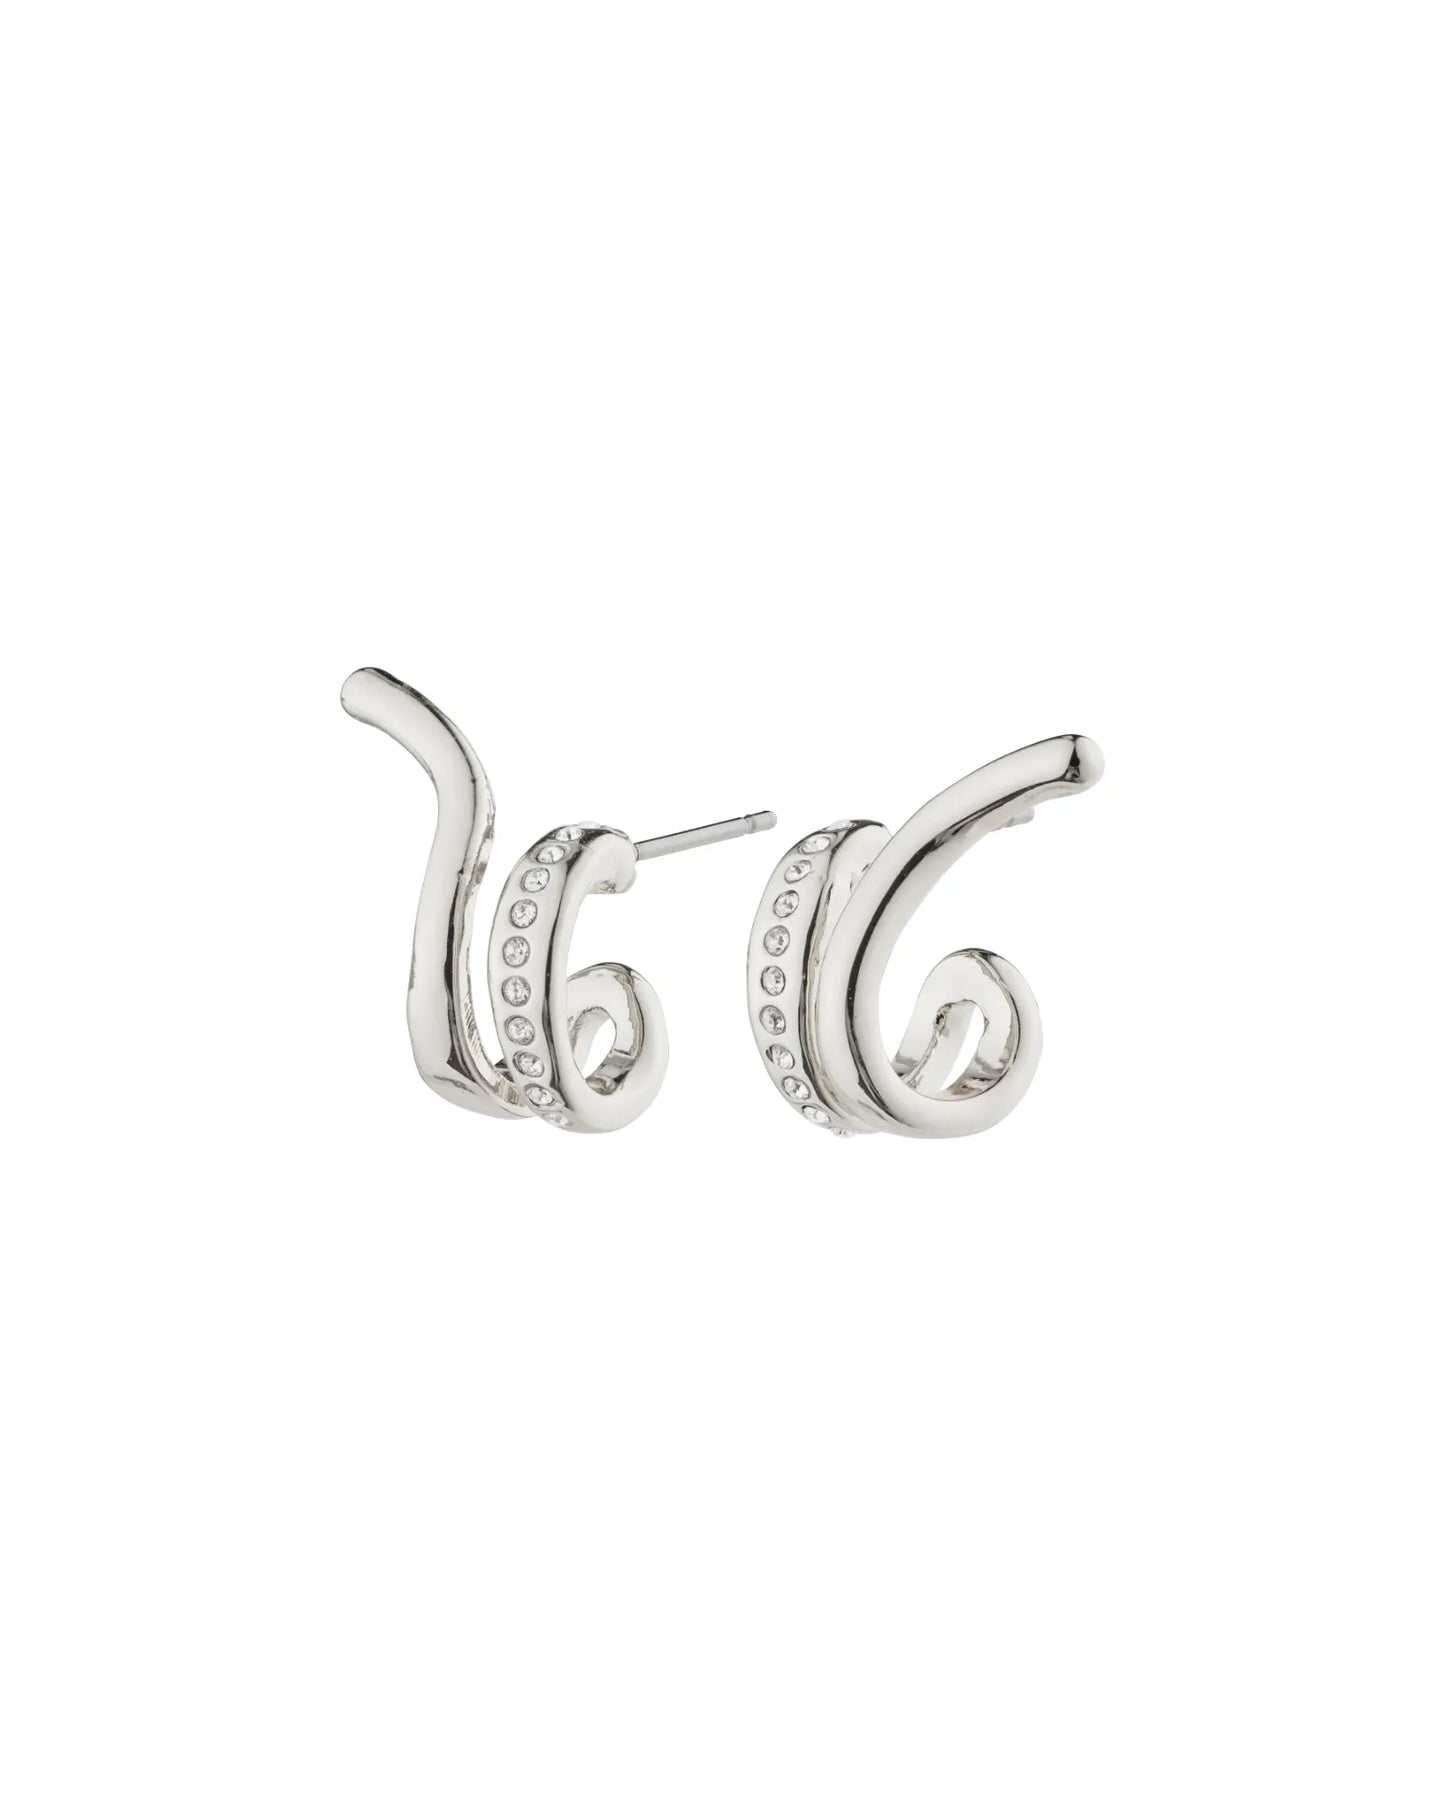 NADINE Recycled Earrings - Silver Plated